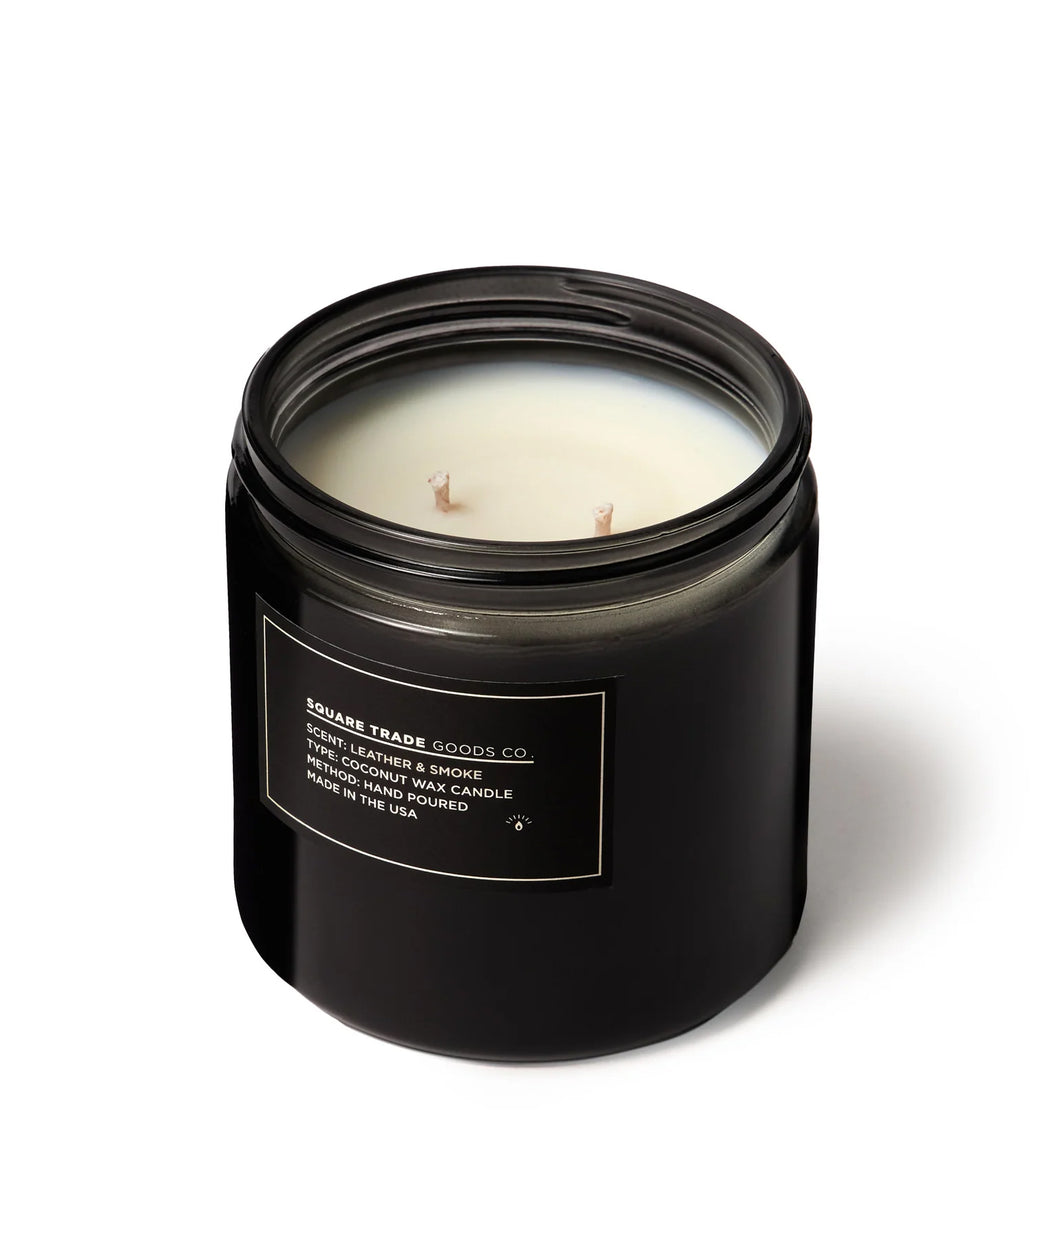 Square Trade Goods Co. - Leather Smoke - 16oz Double Wick Candle